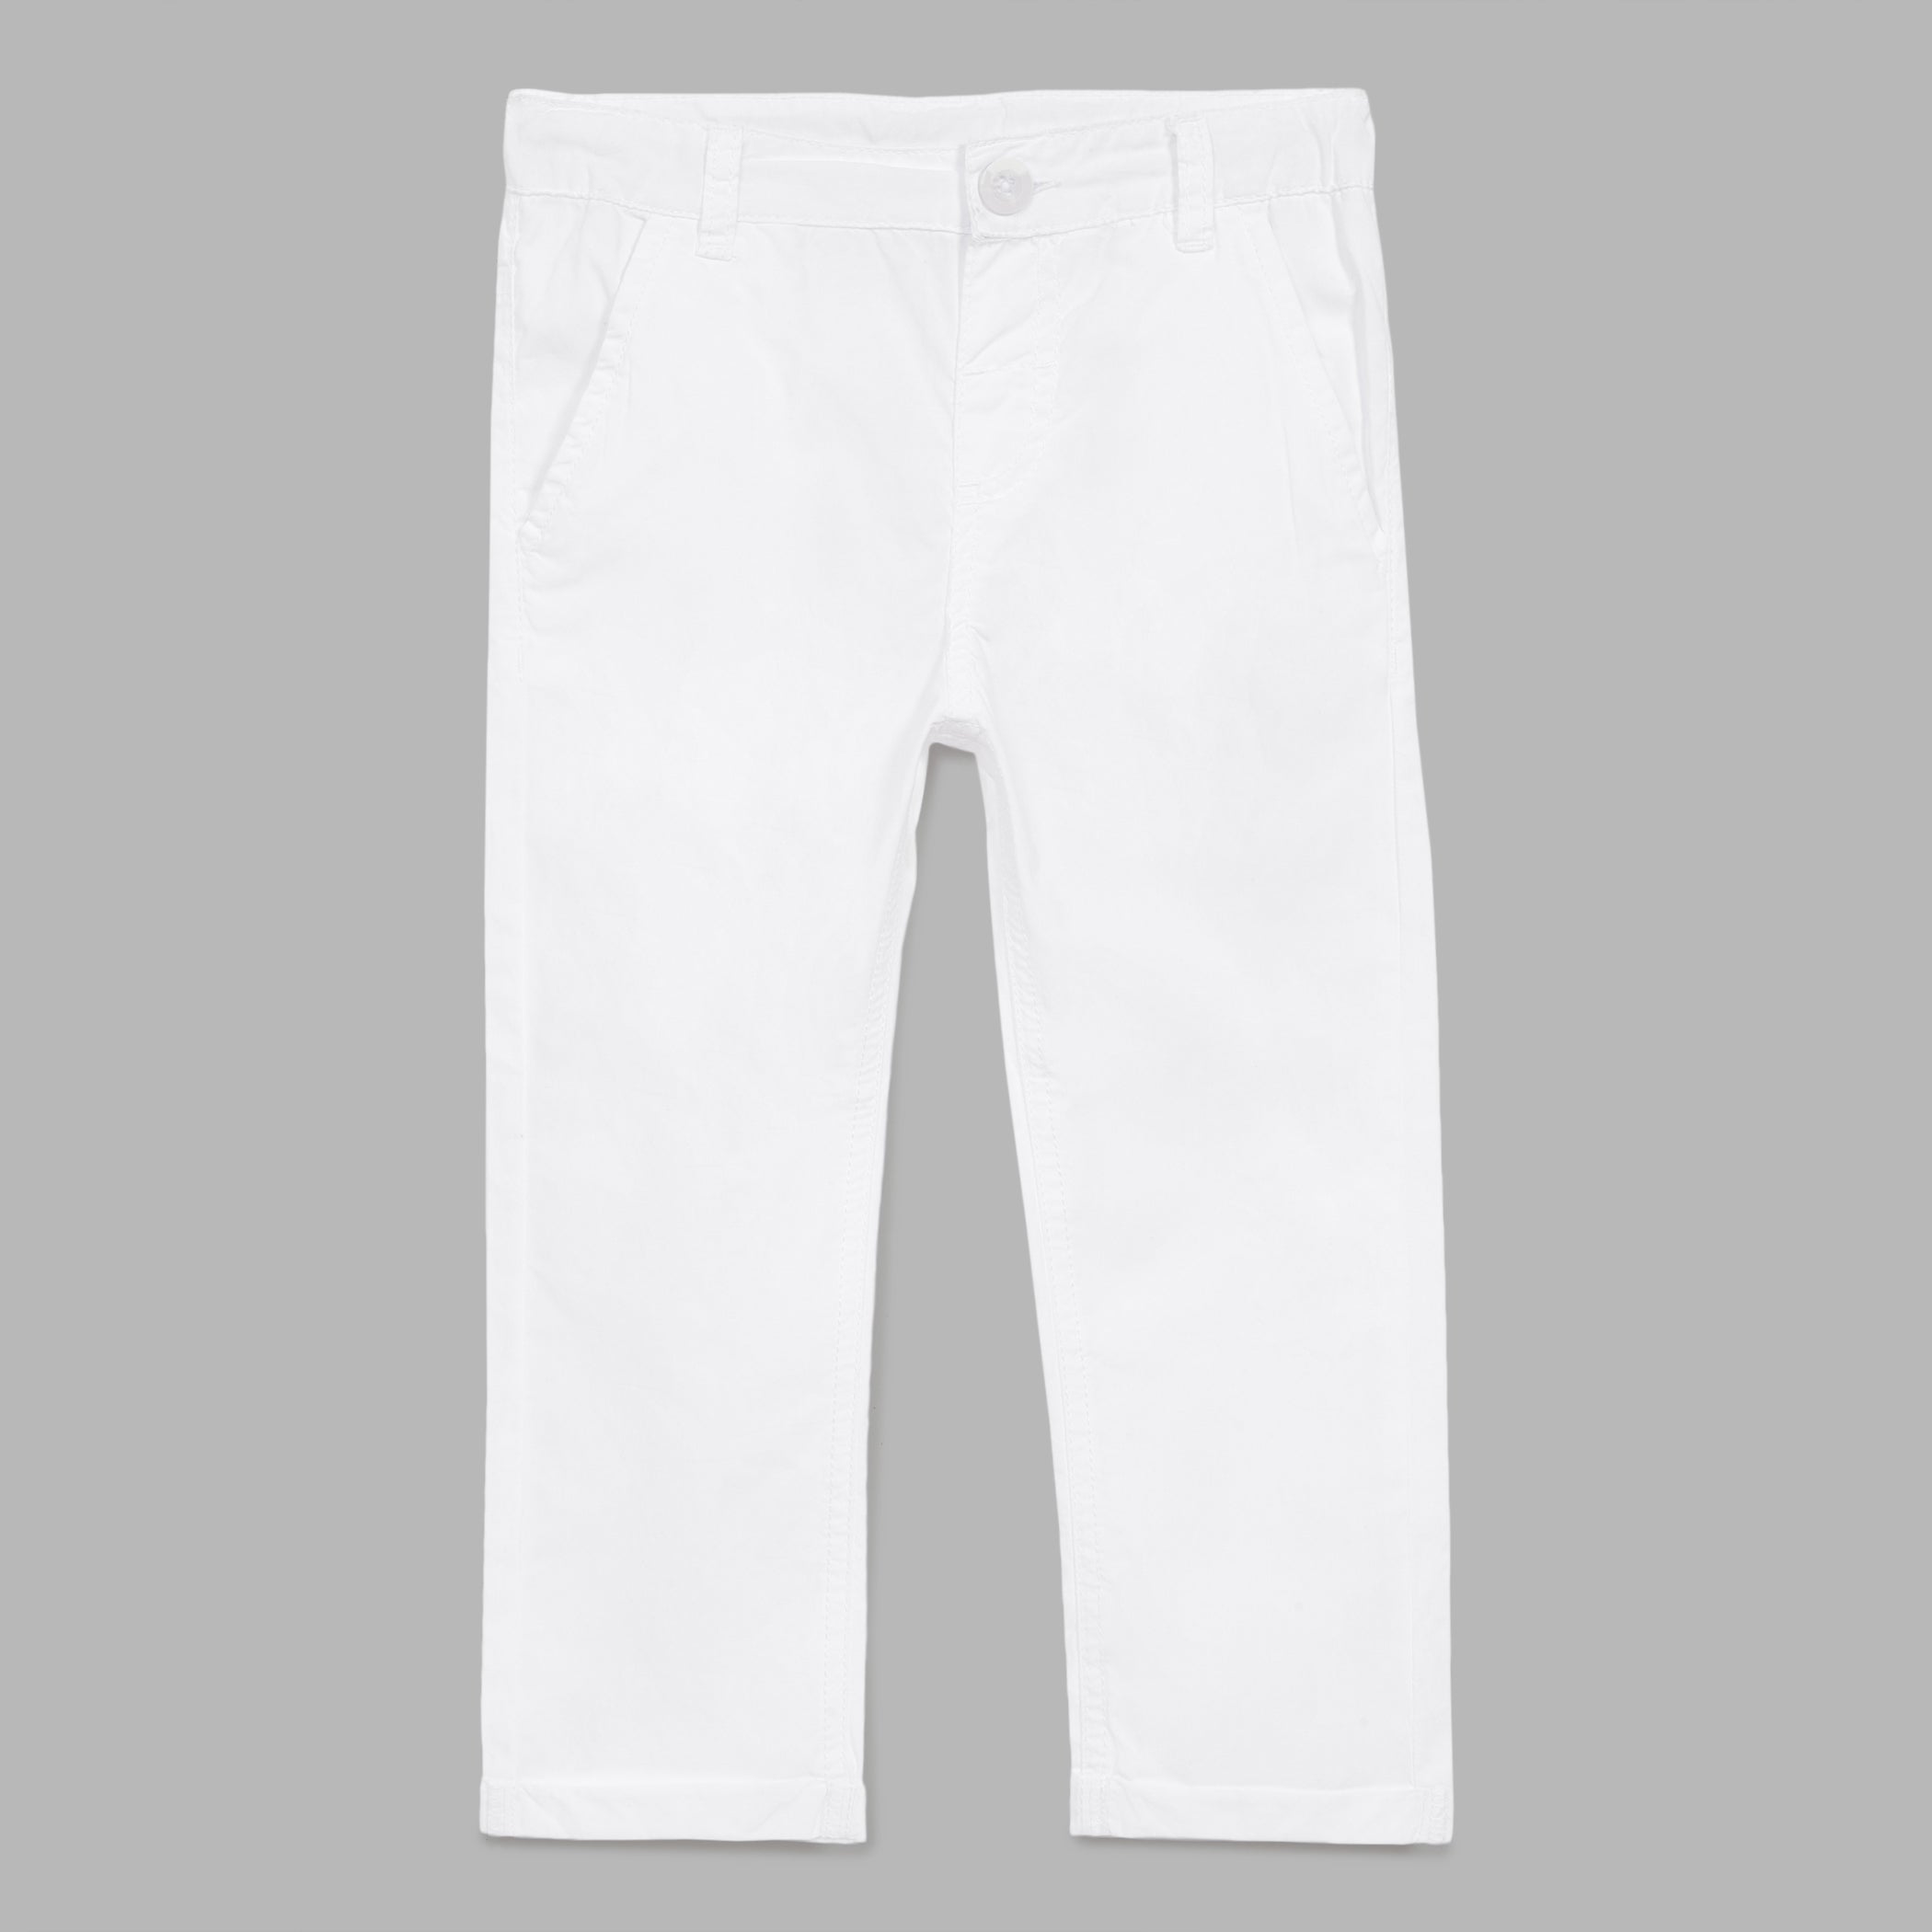 Boys Stretch Skinny Woven Chino Pants | The Children's Place - SIMPLYWHT